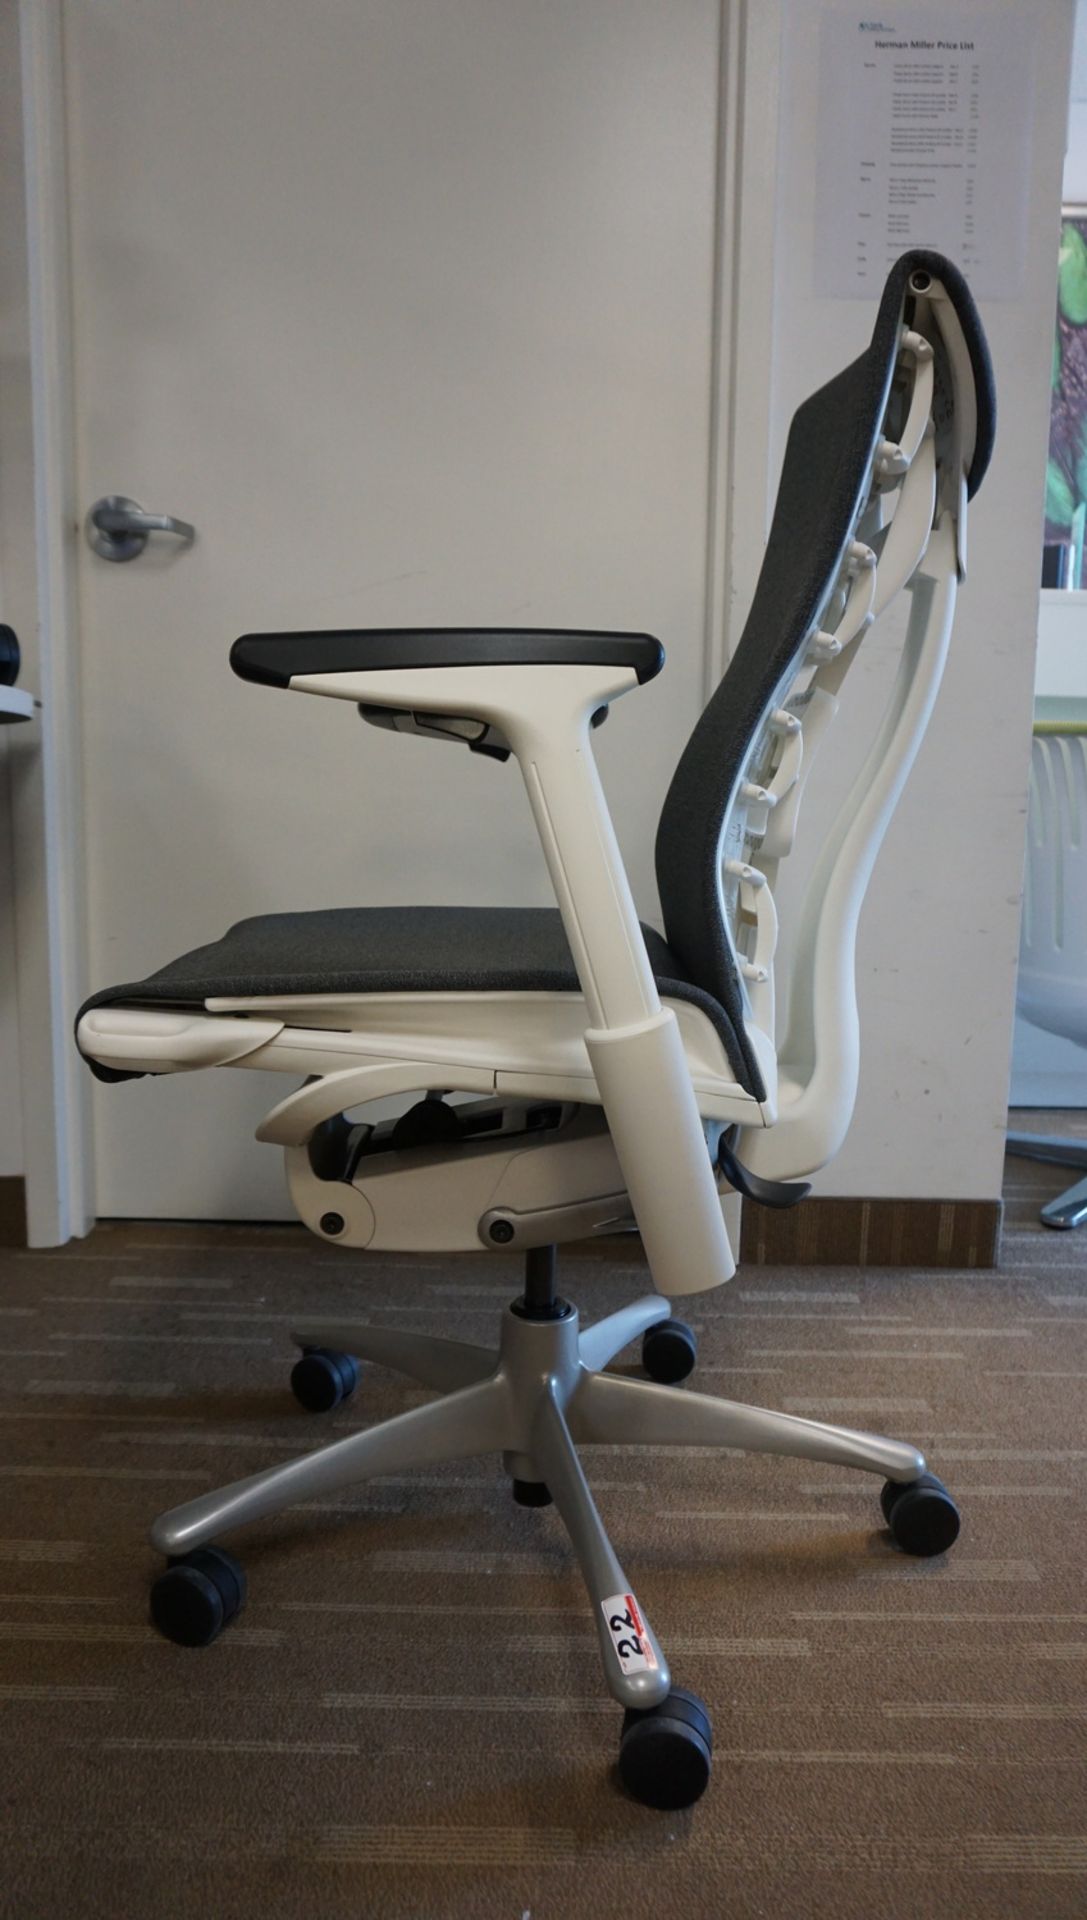 HERMAN MILLER EMBODY OFFICE CHAIR W/ WHITE FRAME, TITANIUM BASE, & GREY FABRIC ($2,700 MSRP) - Image 4 of 4